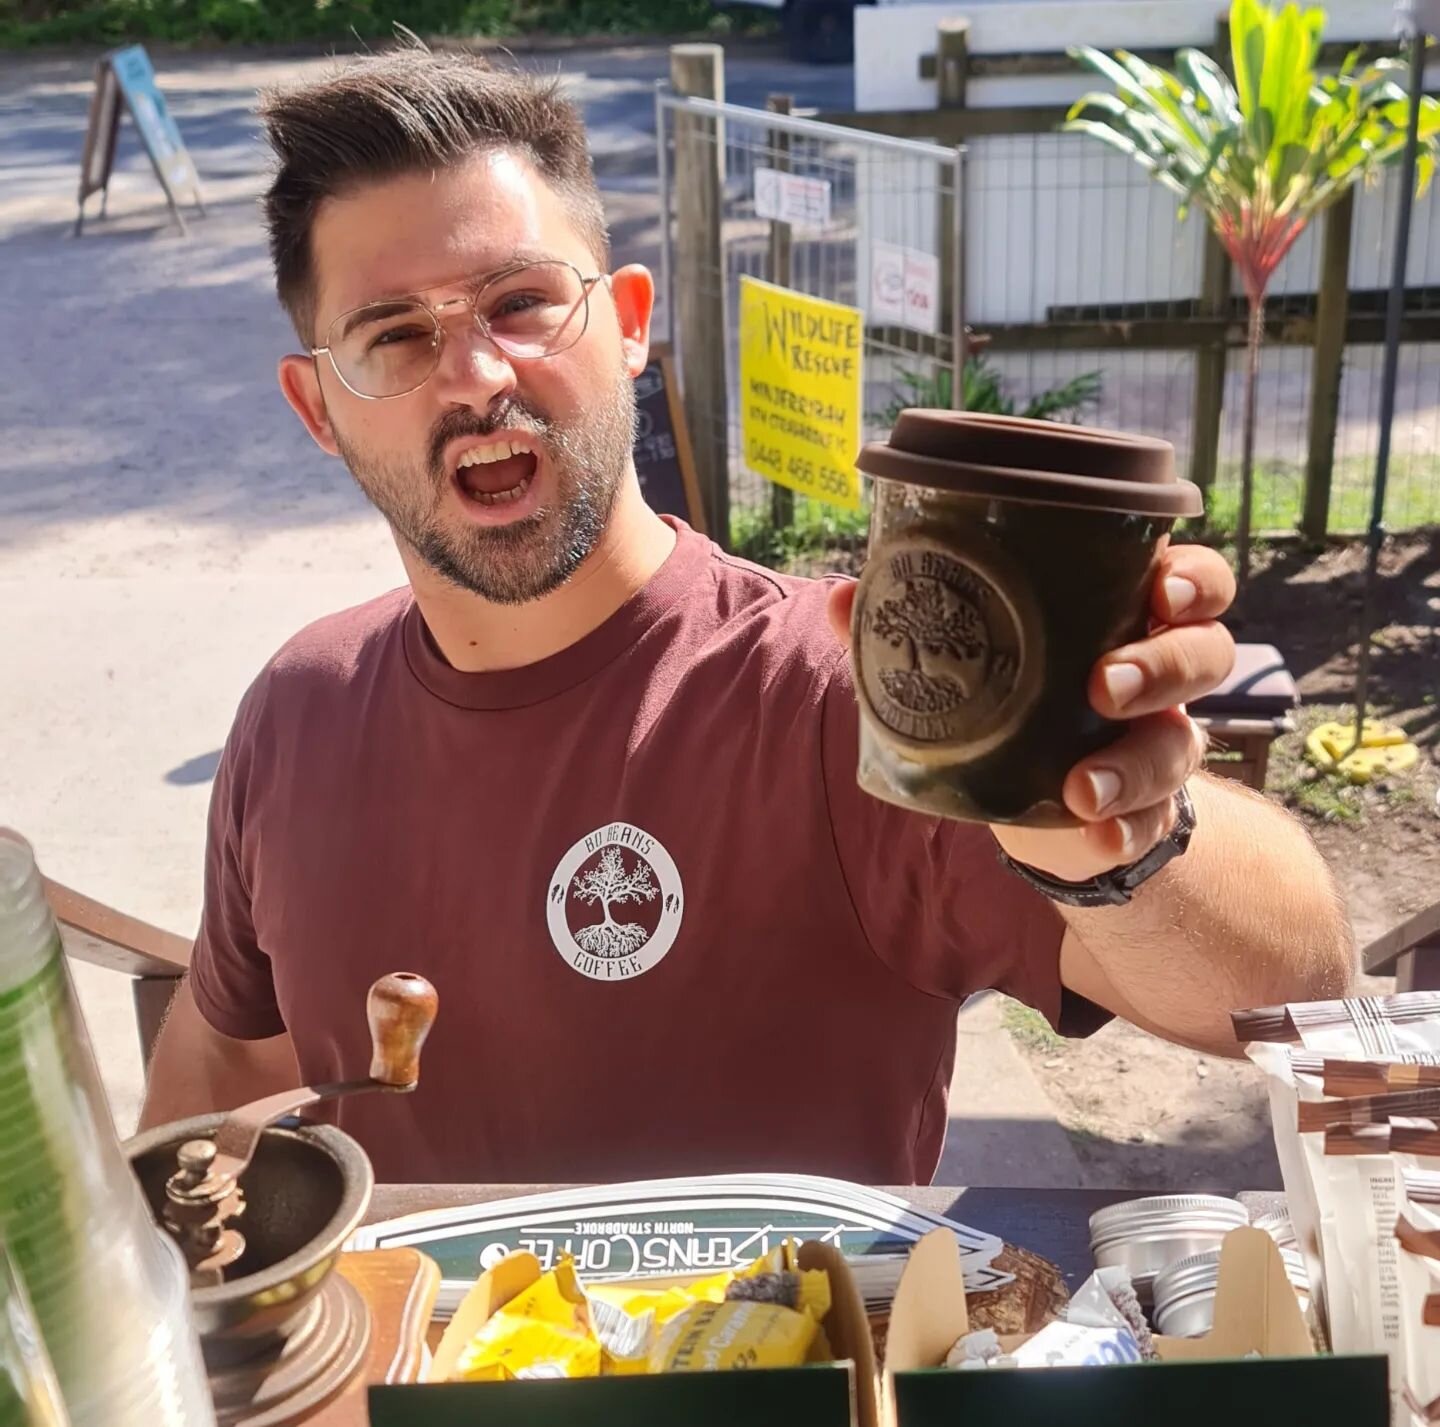 🤯 What did you say 🤔

If you bring your own cup, you get 10% off, you reduce your waste and the coffee taste better ♻️

Saving the planet, one coffee at a time 🙏

You could even buy one of our own unique @box.ho.pottery Bo Beans Pottery Keep Cups 